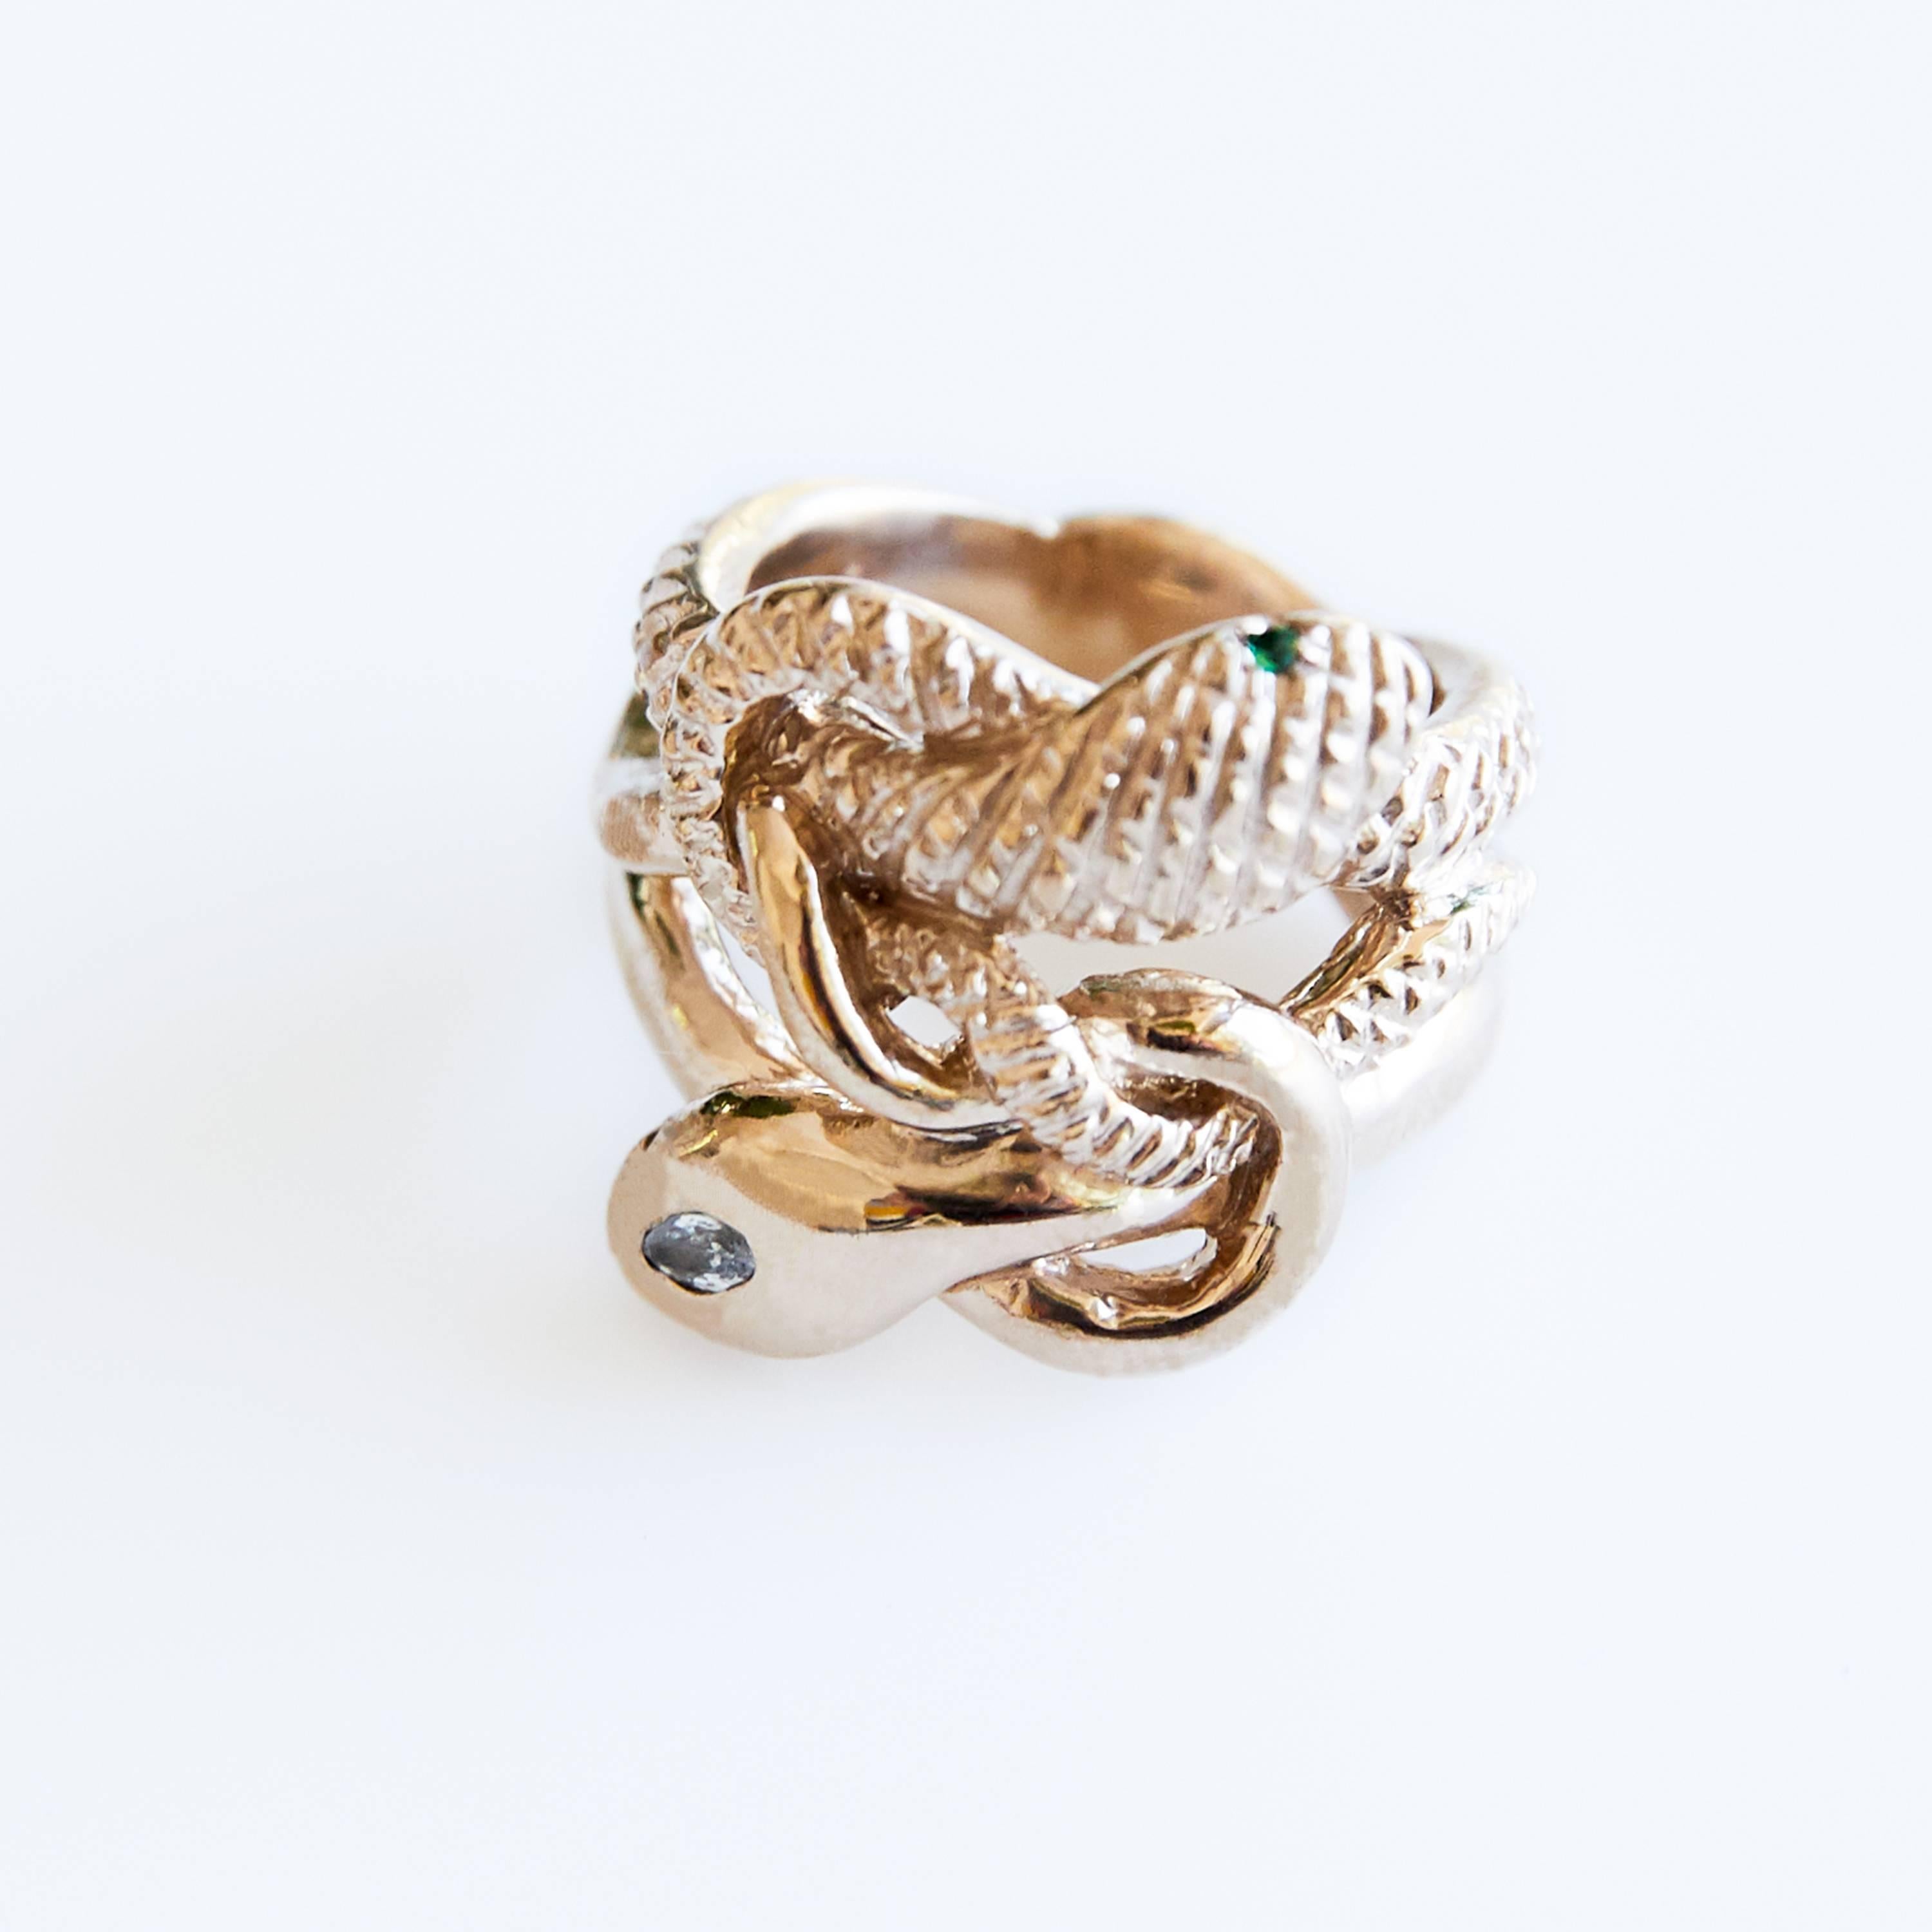 Brilliant Cut Sapphire Emerald Snake Statement Ring Cocktail Ring Bronze J Dauphin For Sale